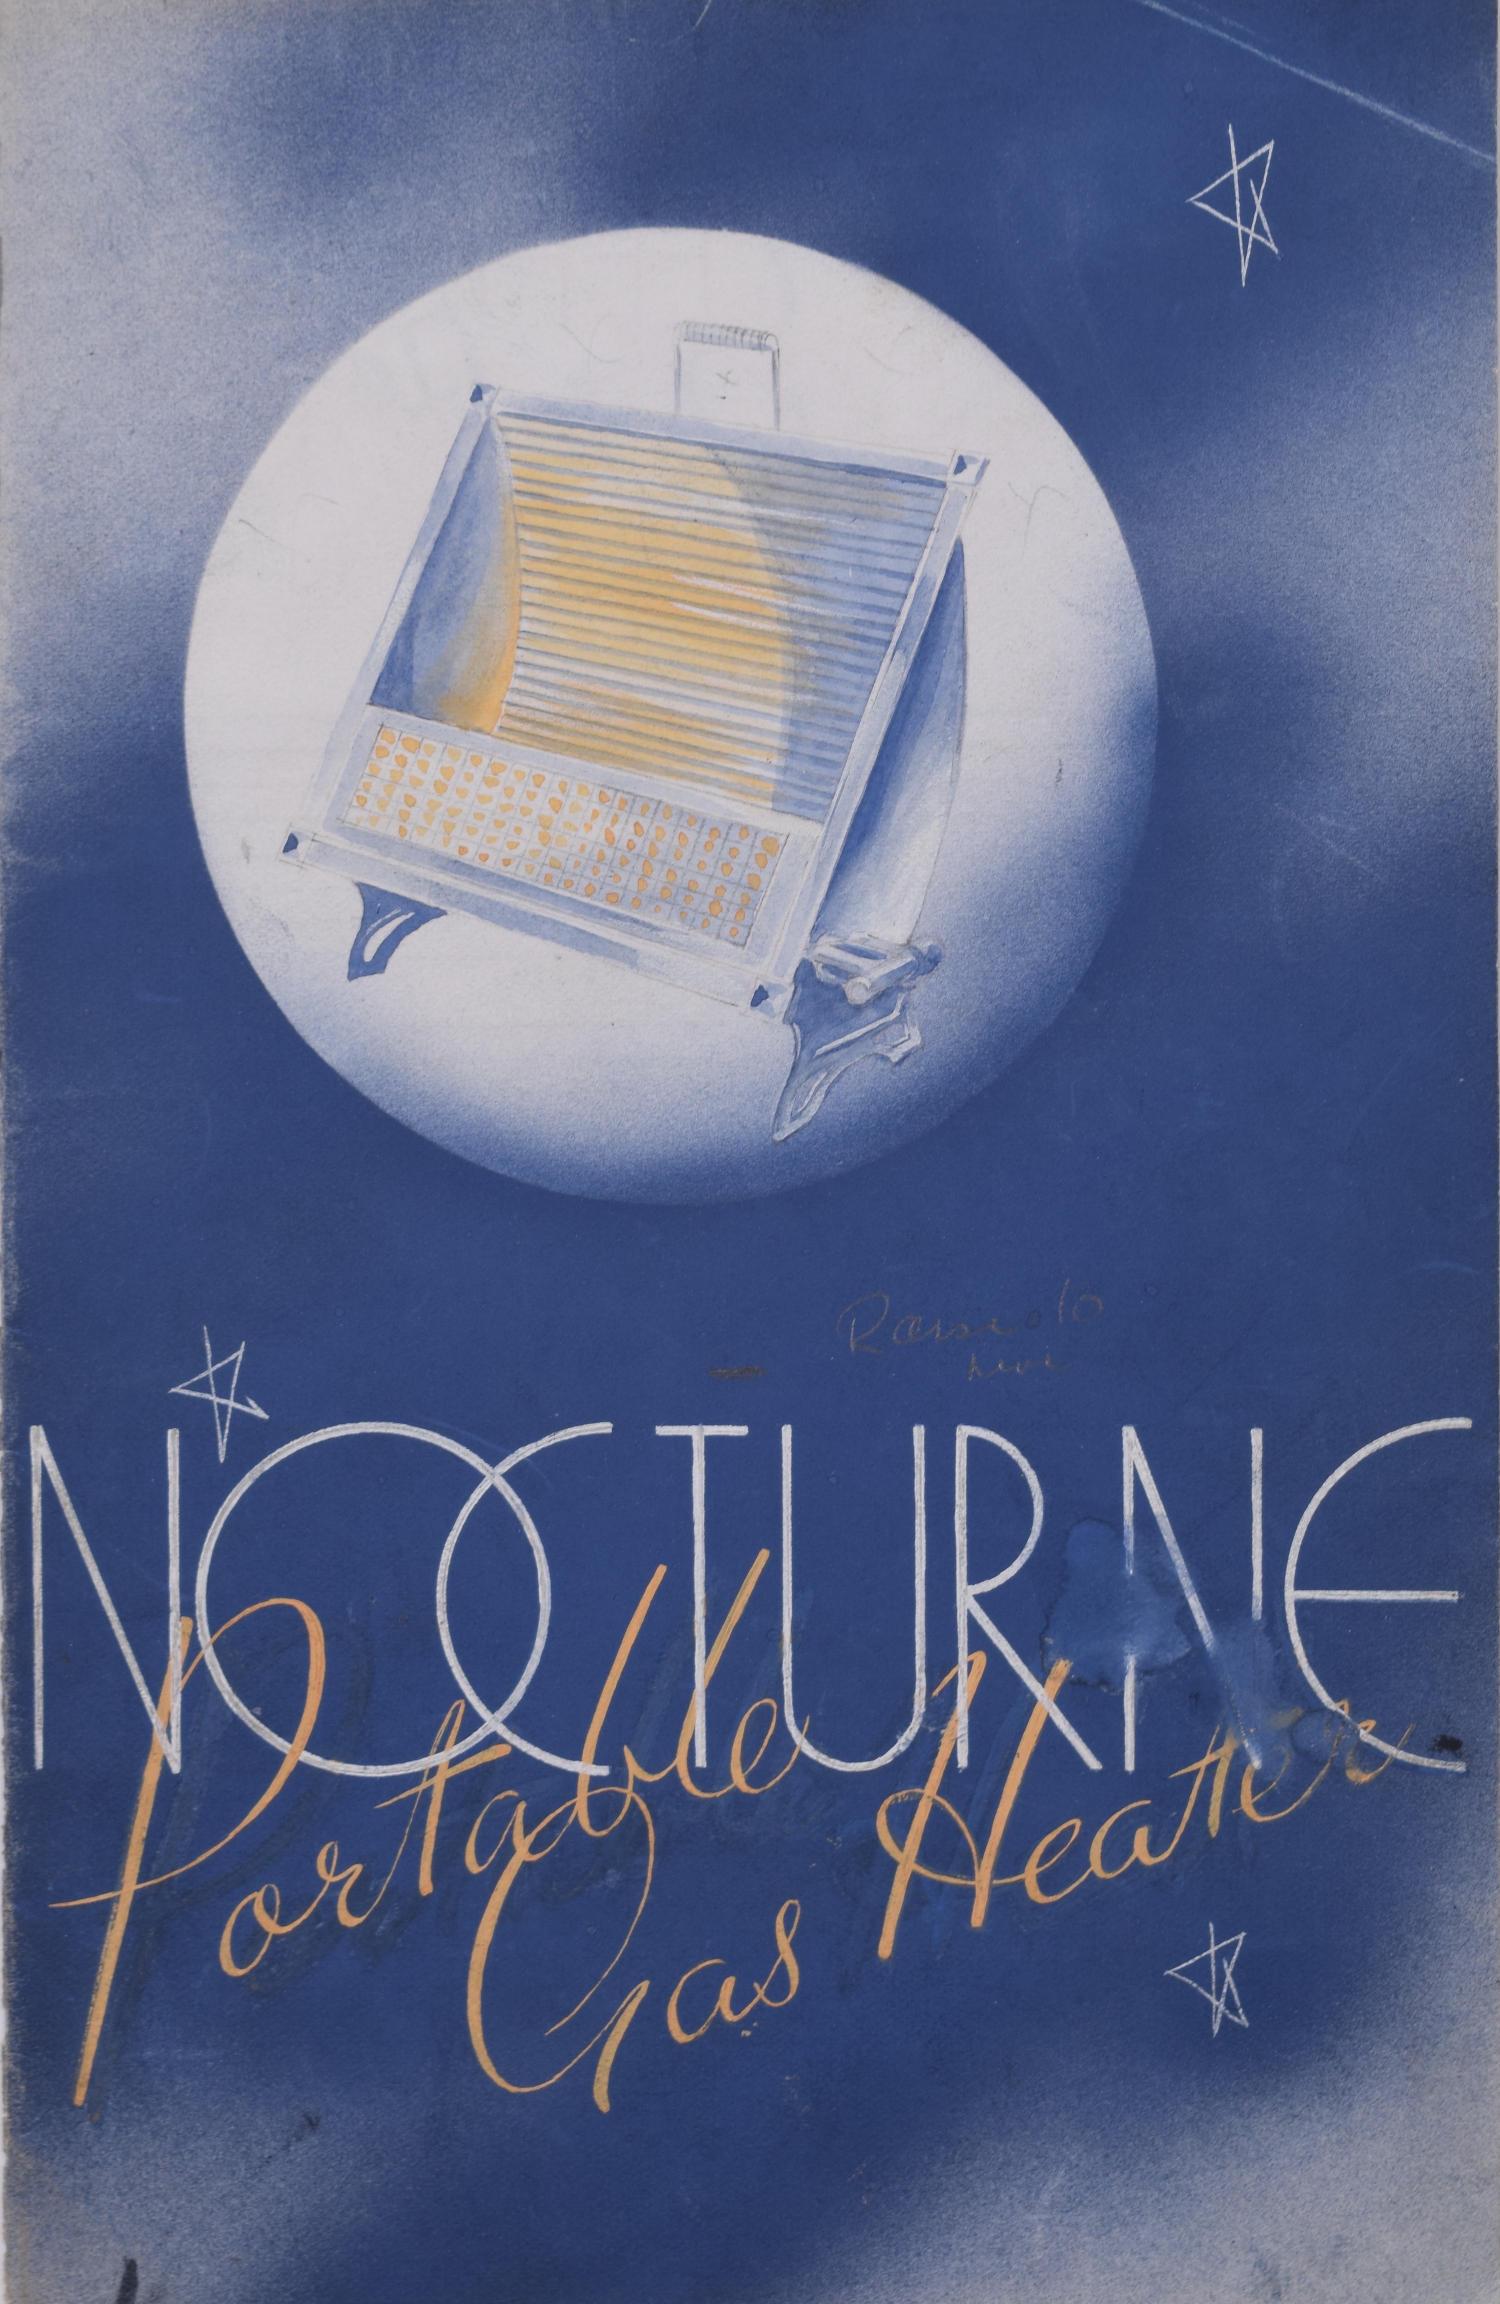 To see more, scroll down to "More from this Seller" and below it click on "See all from this Seller."

Brownbridge (flourished 1930s - 1940s)
Nocturne Portable Gas Heater brochure design
Gouache and mixed media
21.5 x 14 cm

From a small archive of